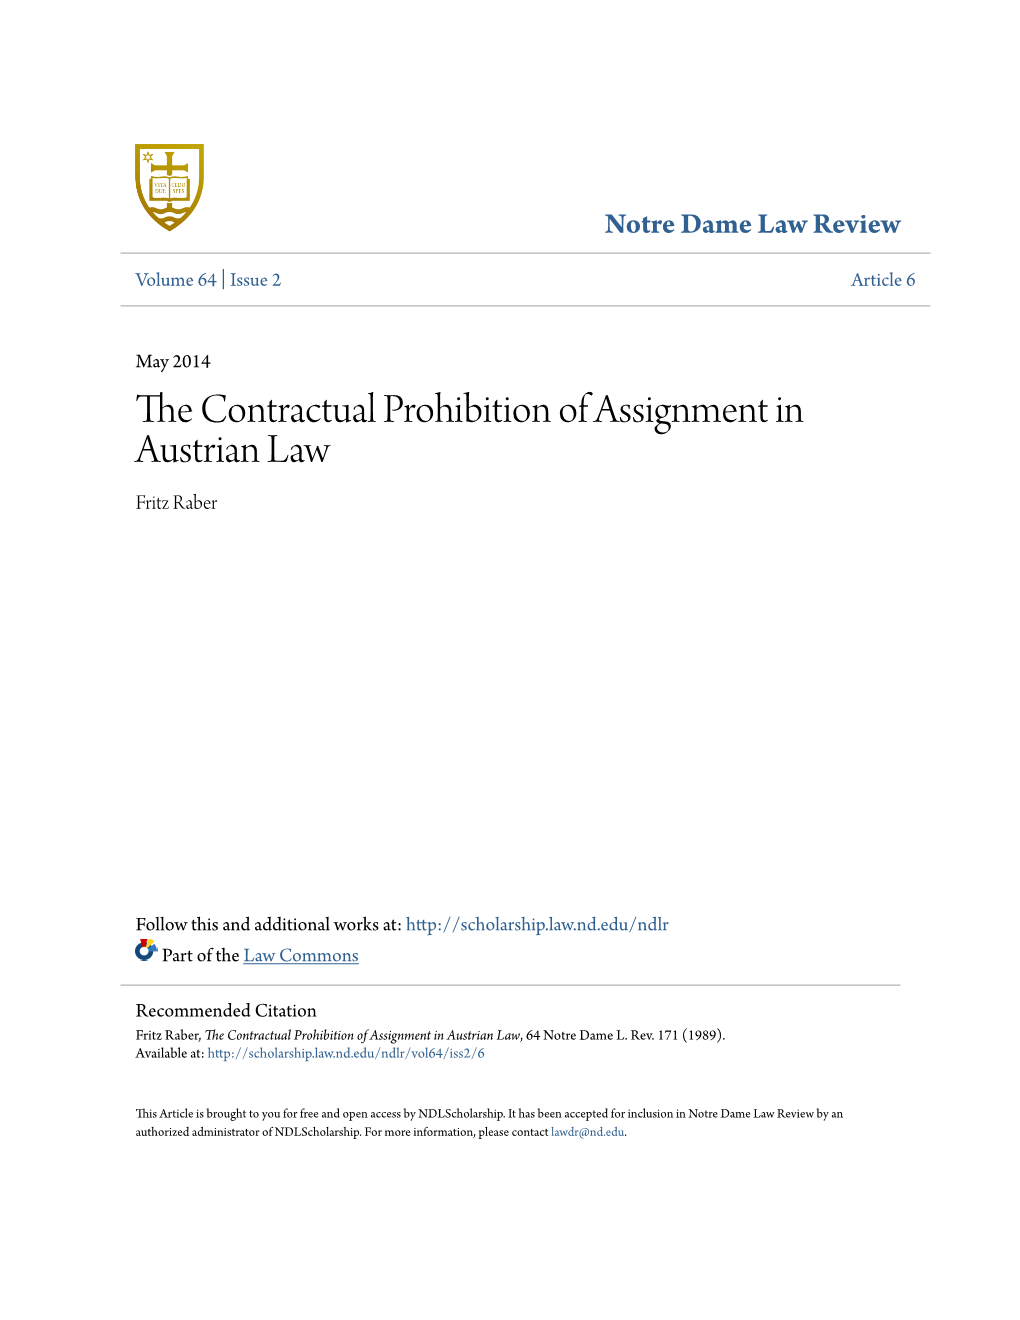 The Contractual Prohibition of Assignment in Austrian Law, 64 Notre Dame L